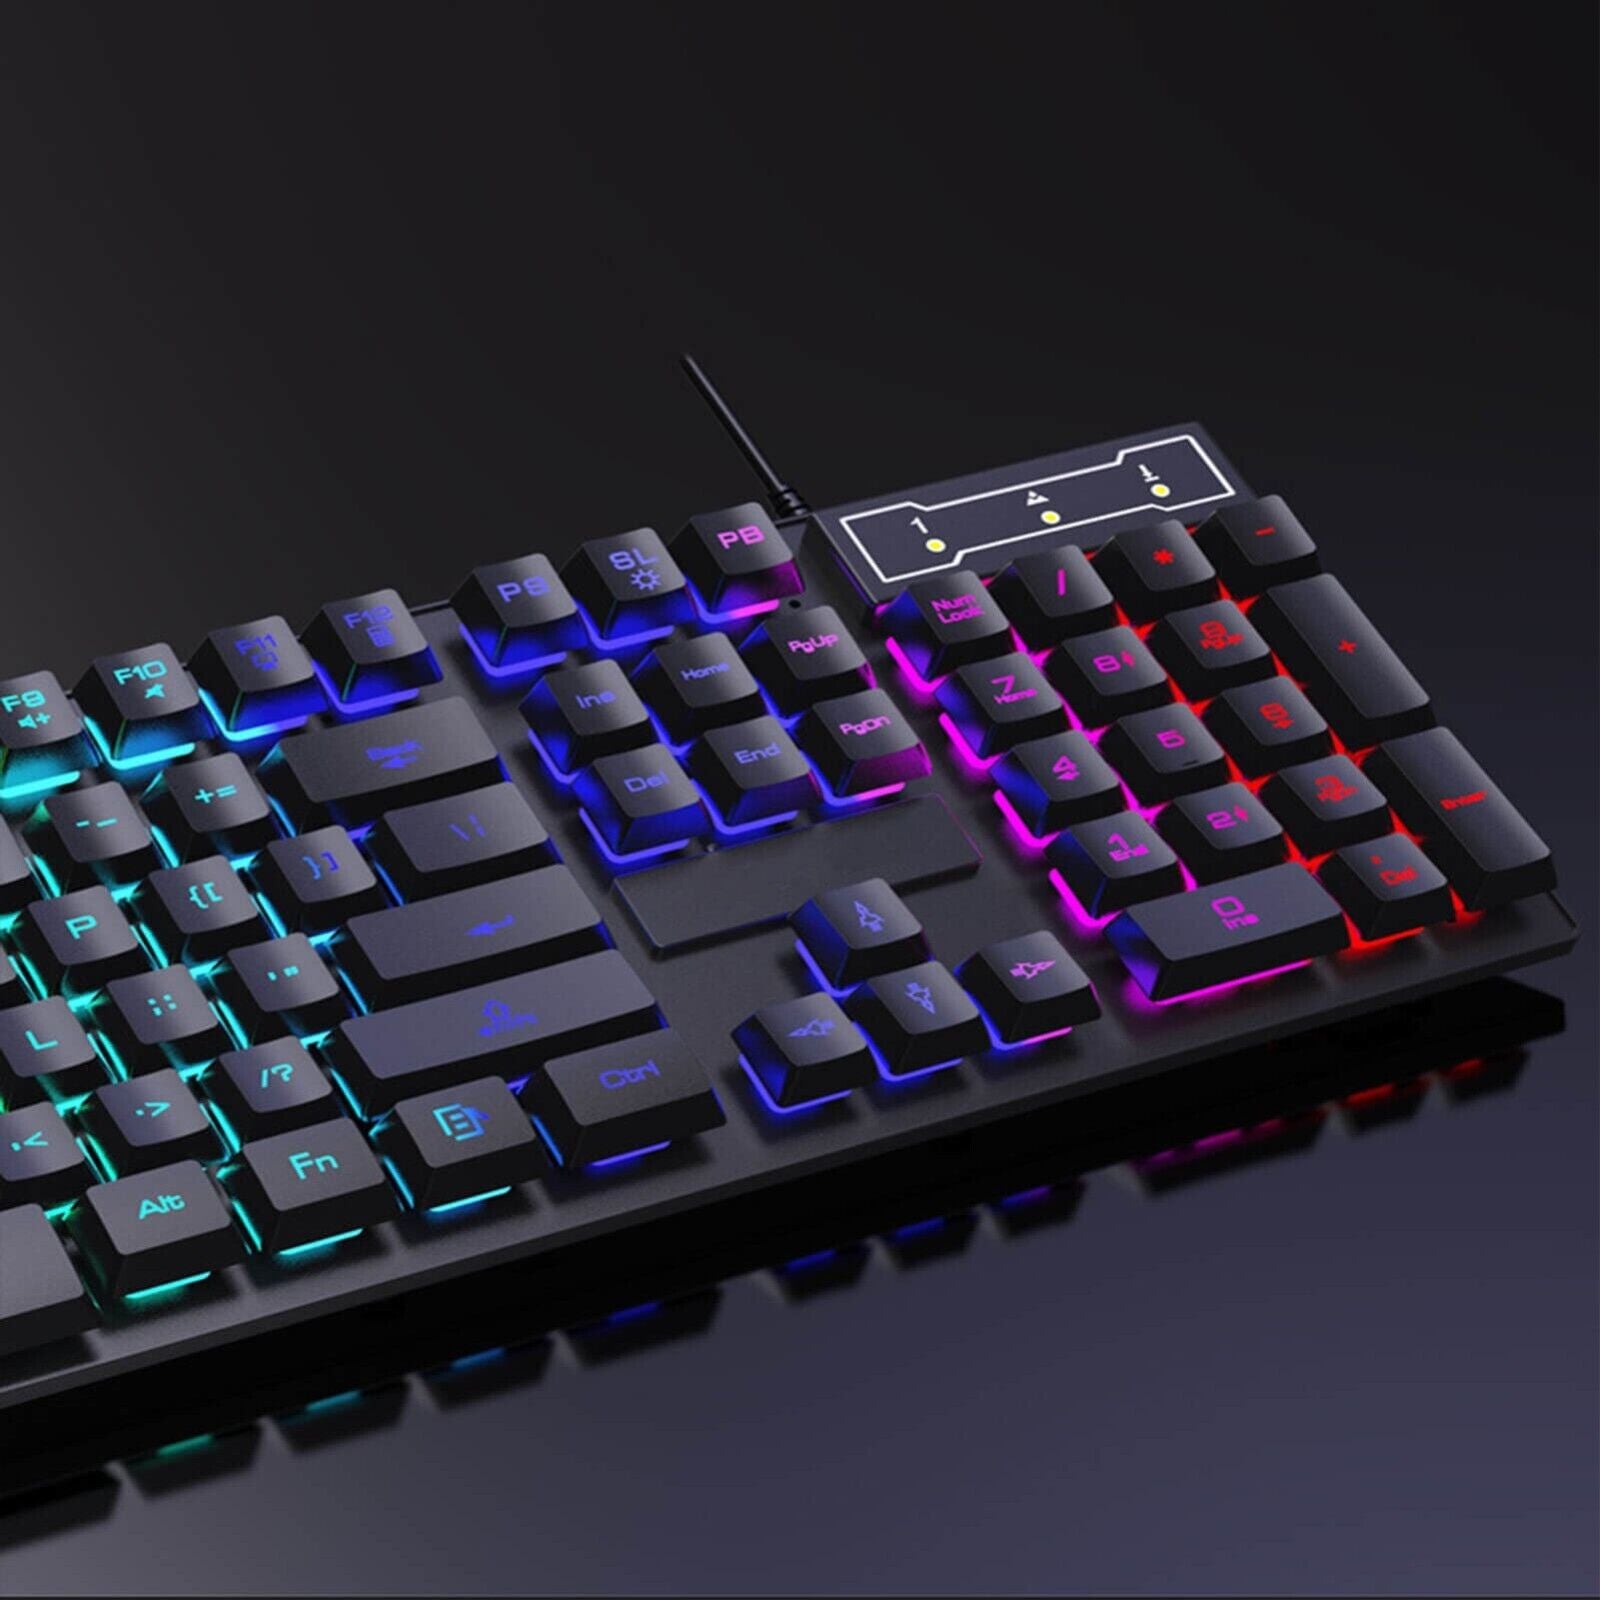 FOREV Keyboard, Wired RGB Backlit Computer Keyboard FV-Q305S (NO MOUSE)